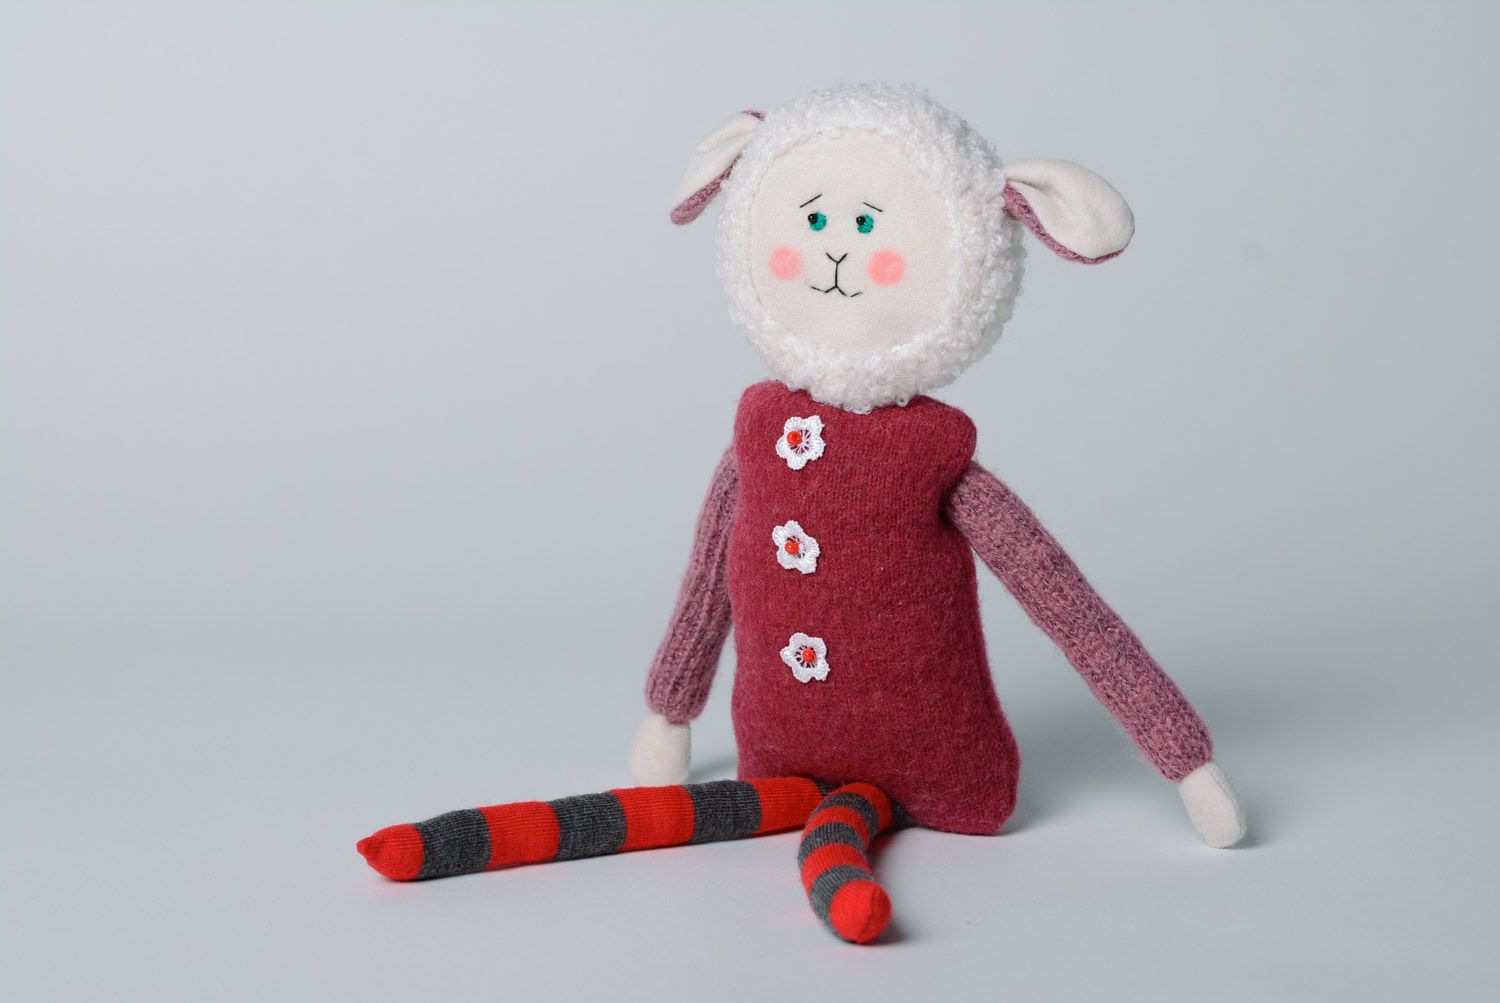 Cute handmade soft toy sewn of jersey and wool in the shape of lamb in coat photo 1